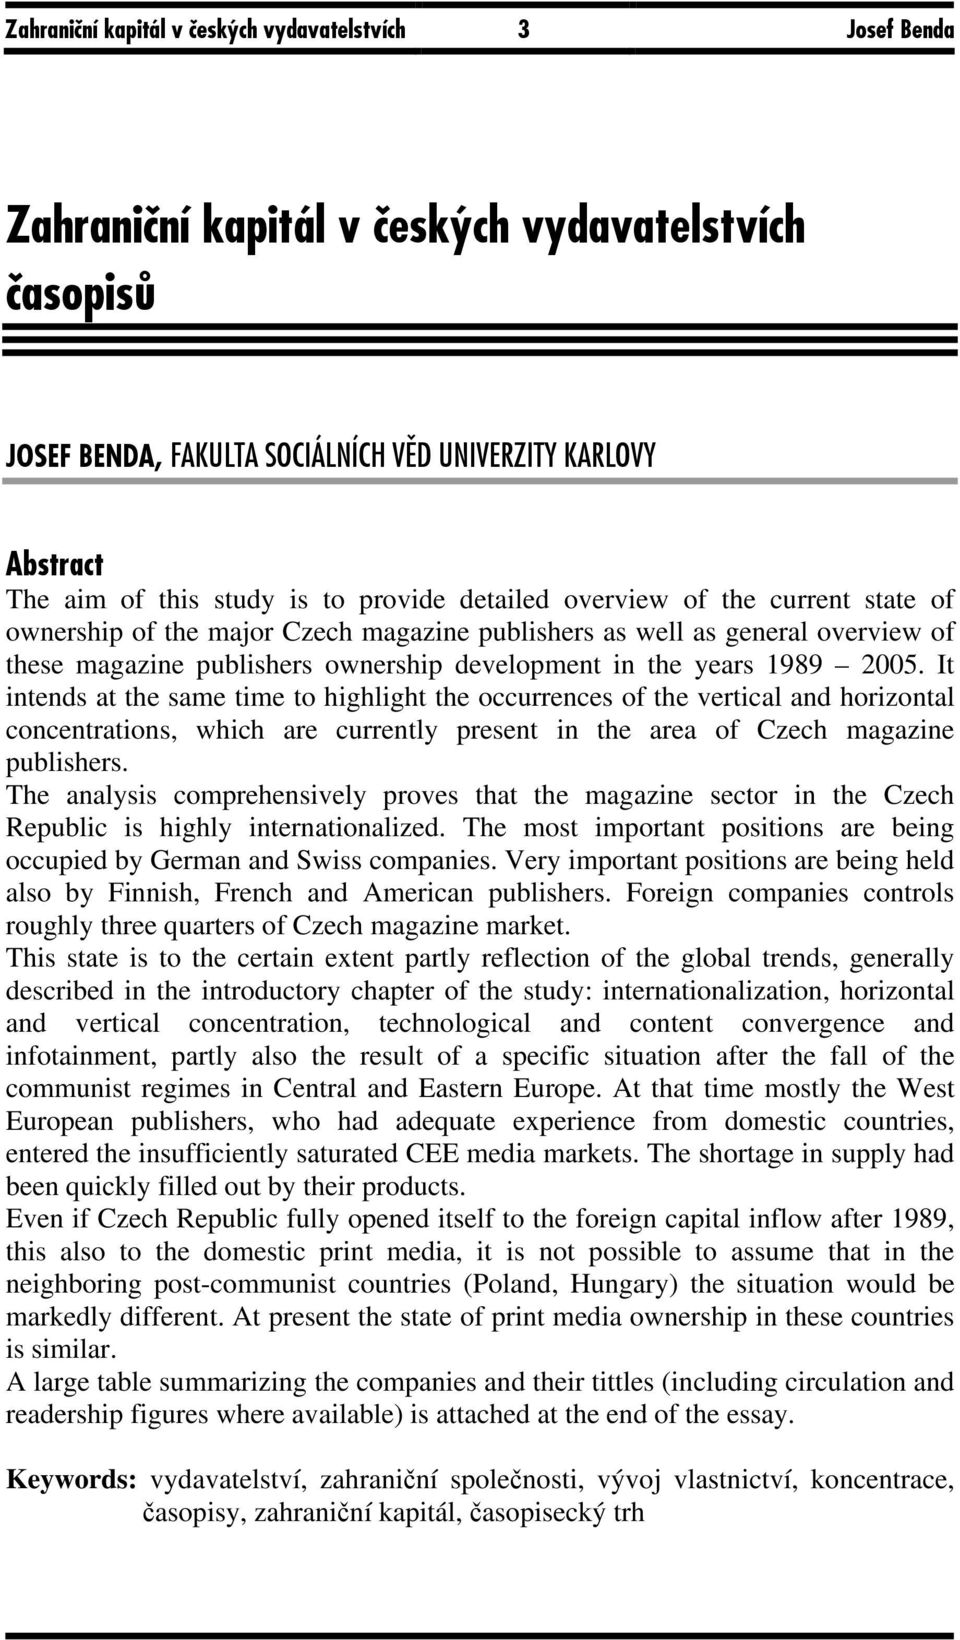 1989 2005. It intends at the same time to highlight the occurrences of the vertical and horizontal concentrations, which are currently present in the area of Czech magazine publishers.